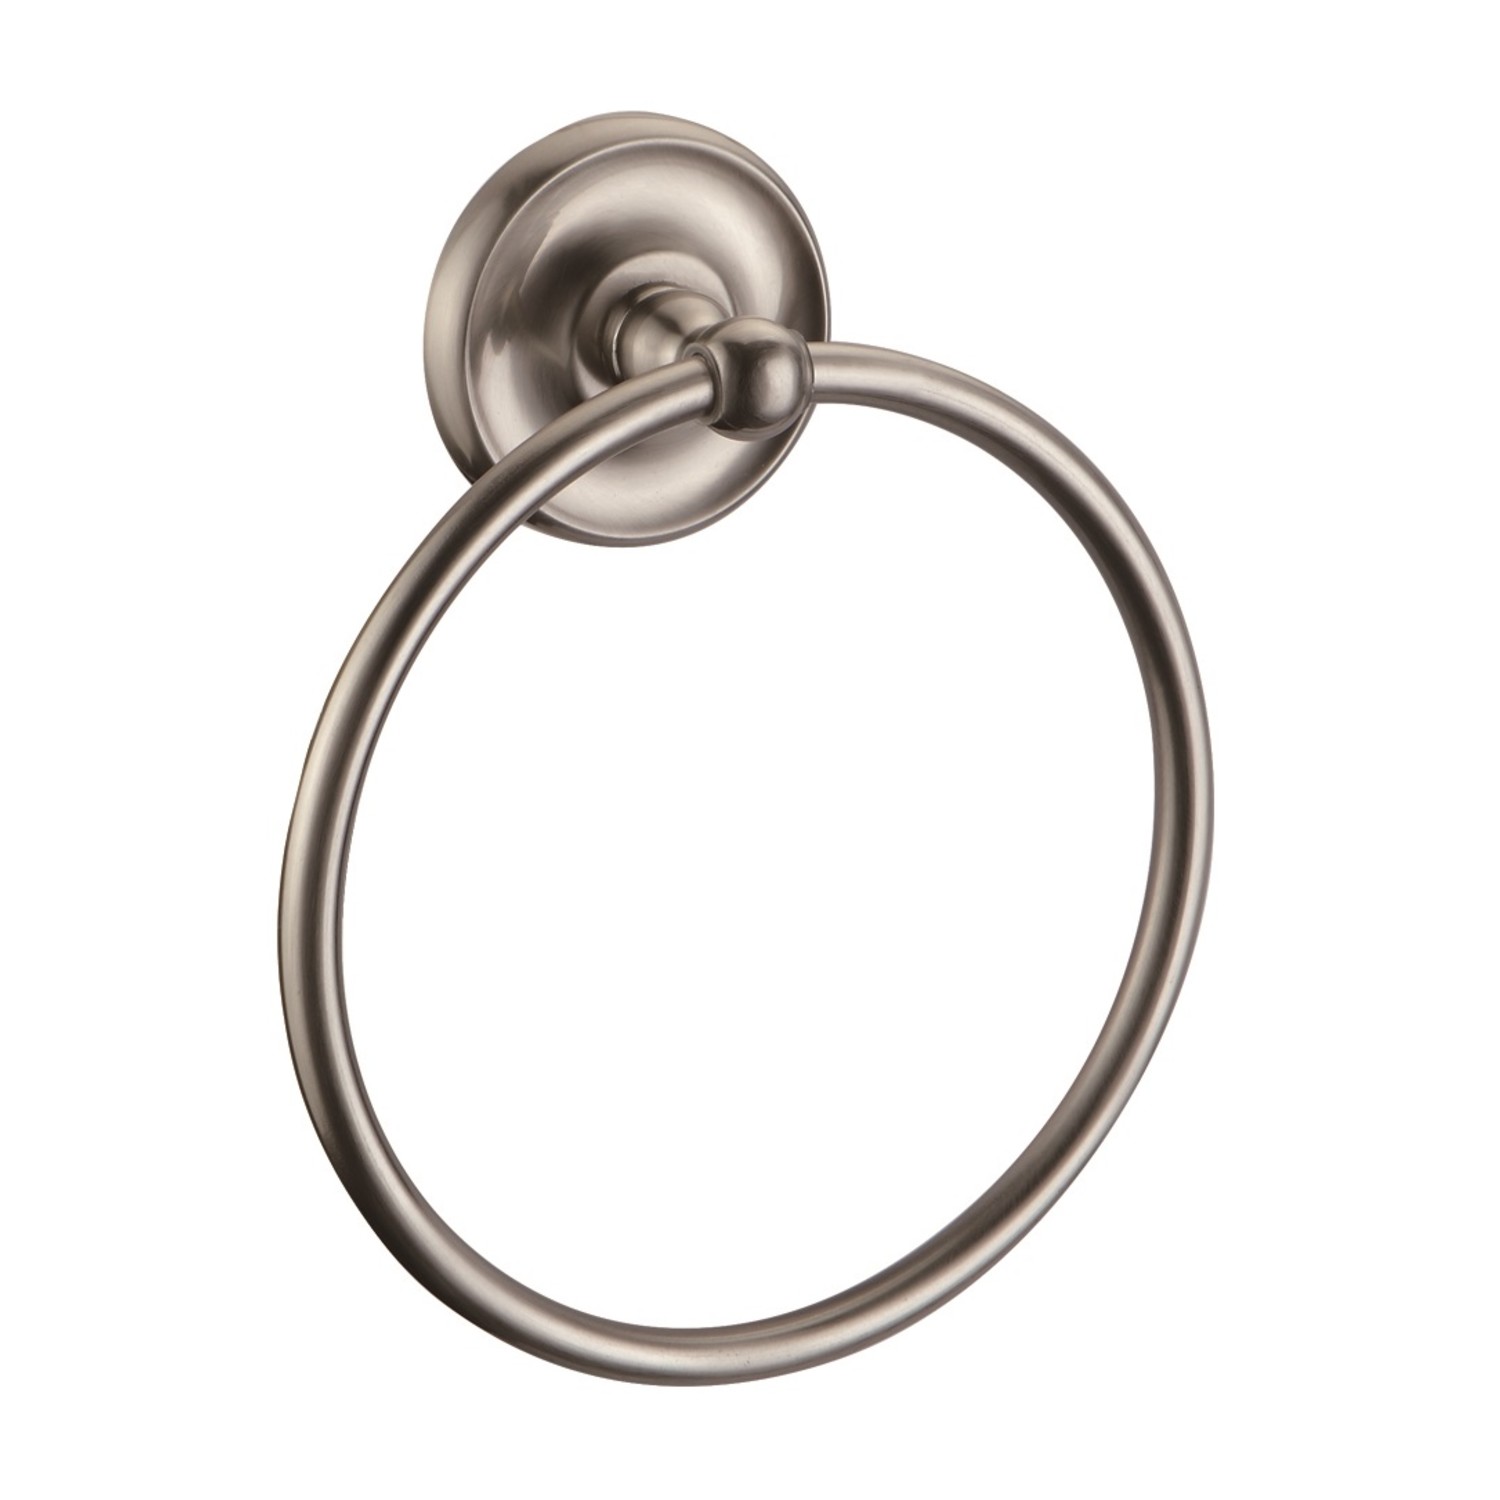 15 Best Brushed Nickel Towel Ring for 2023